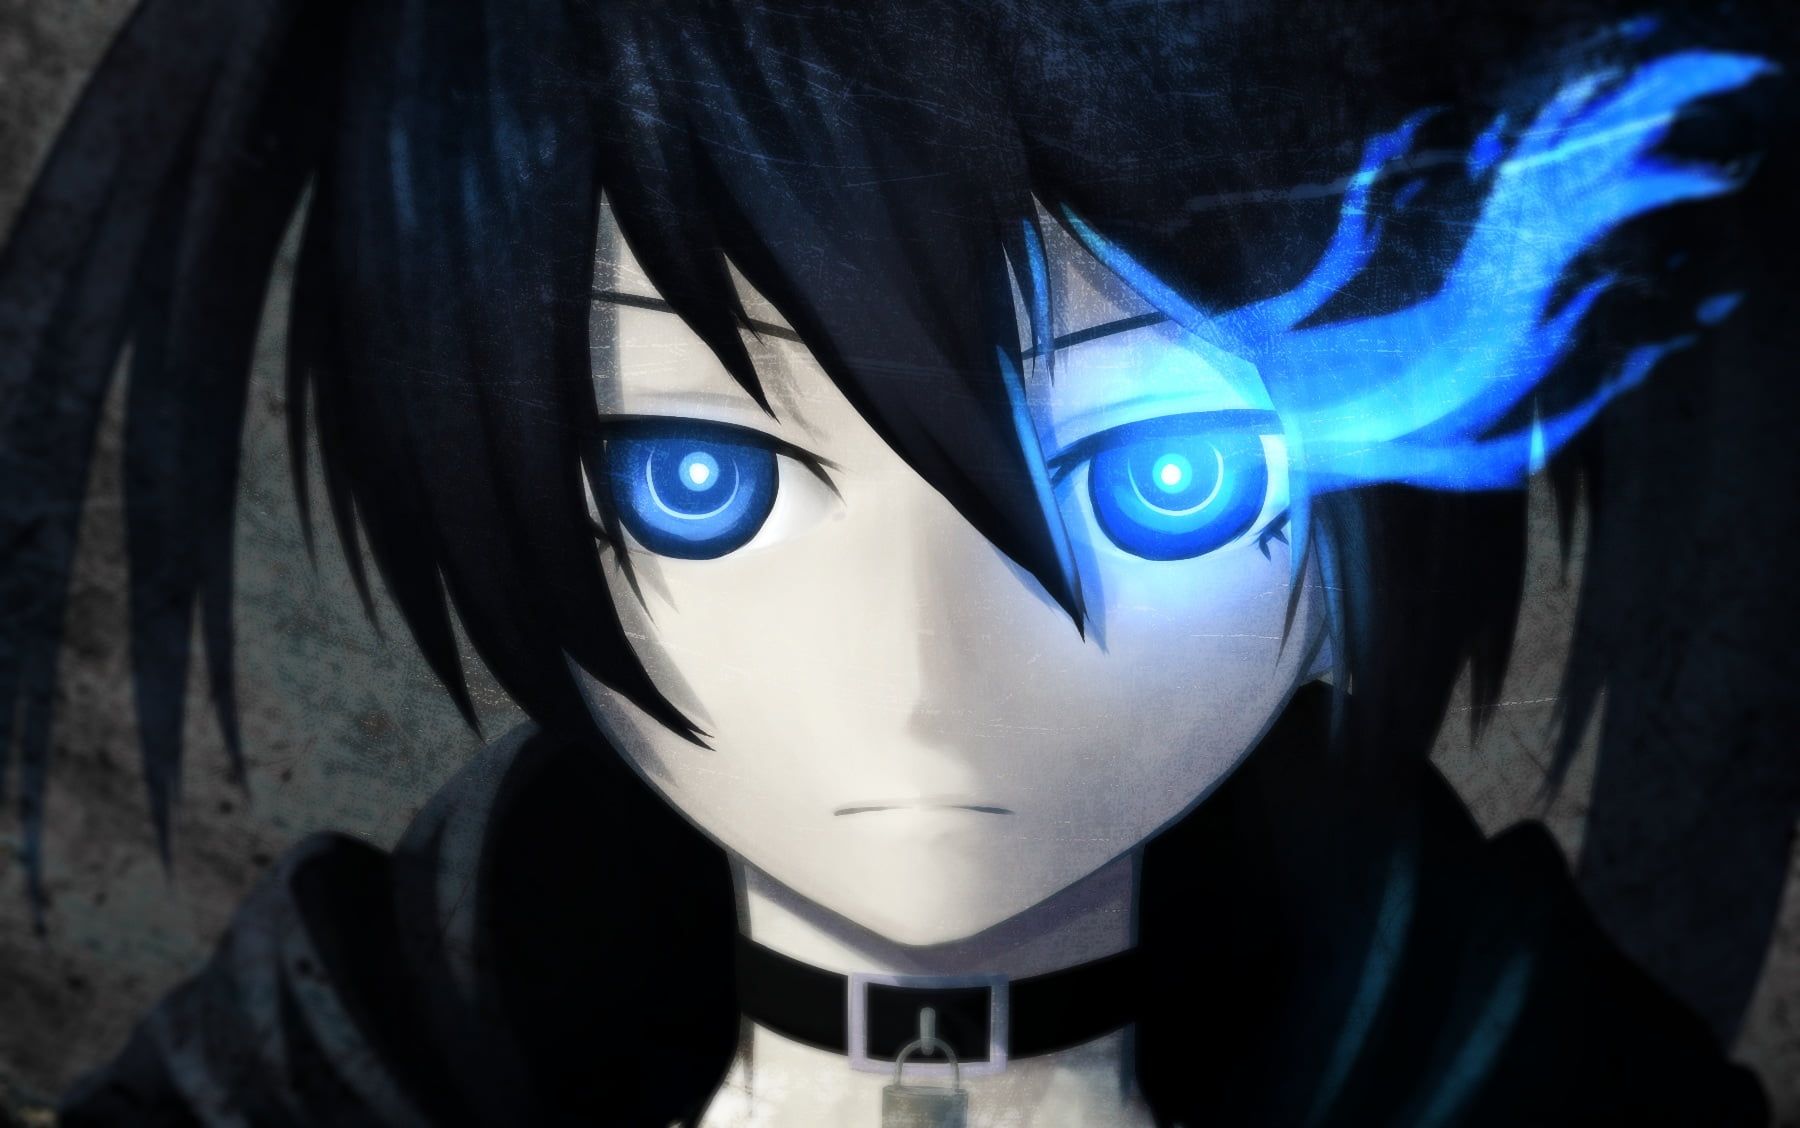 Black haired anime character with blue eyes, Black Rock Shooter